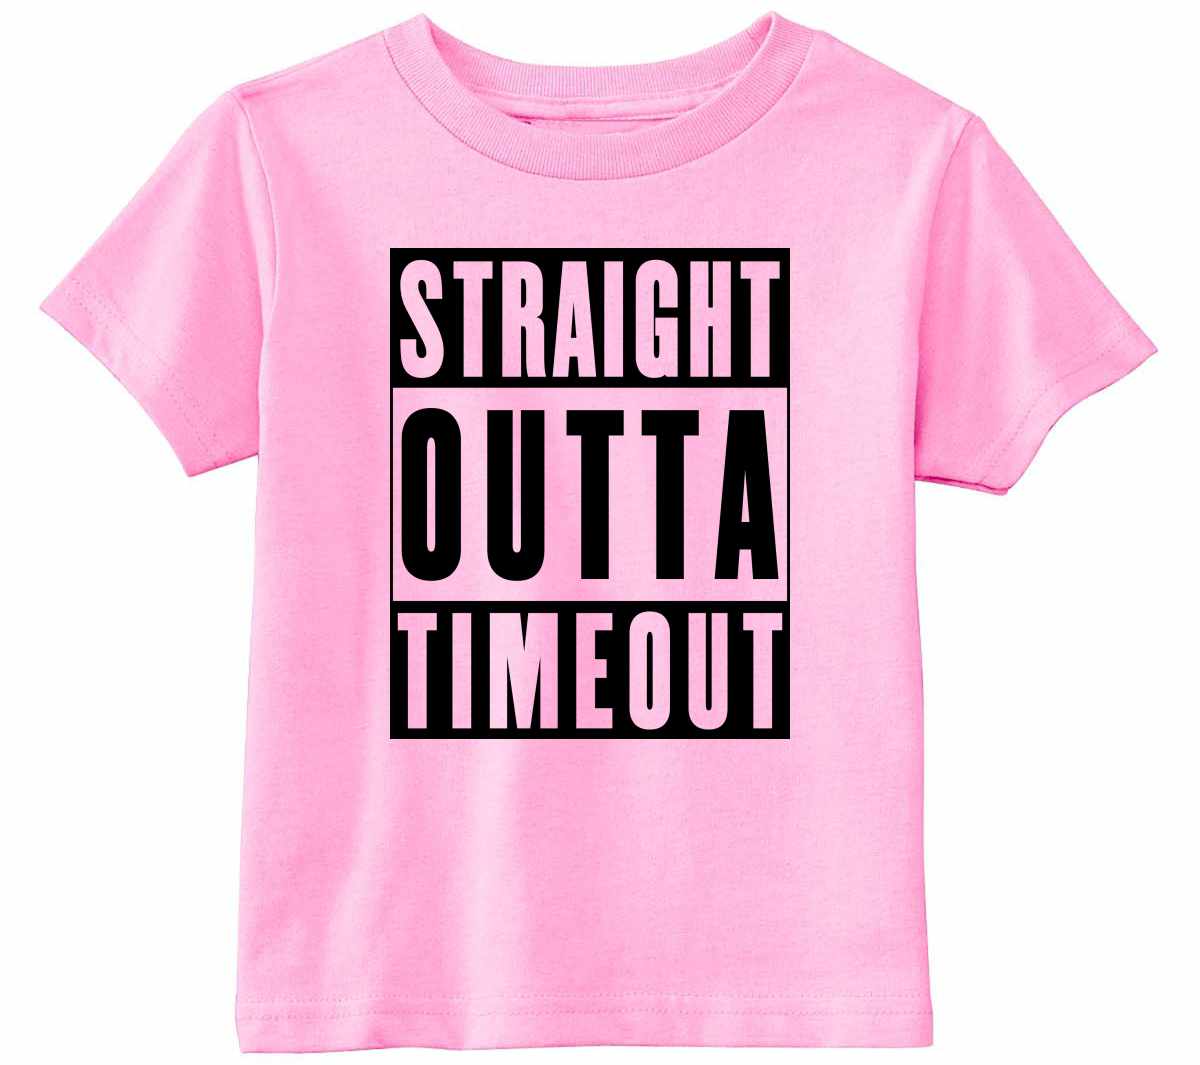 Straight Outta TimeOut Infant/Toddler 